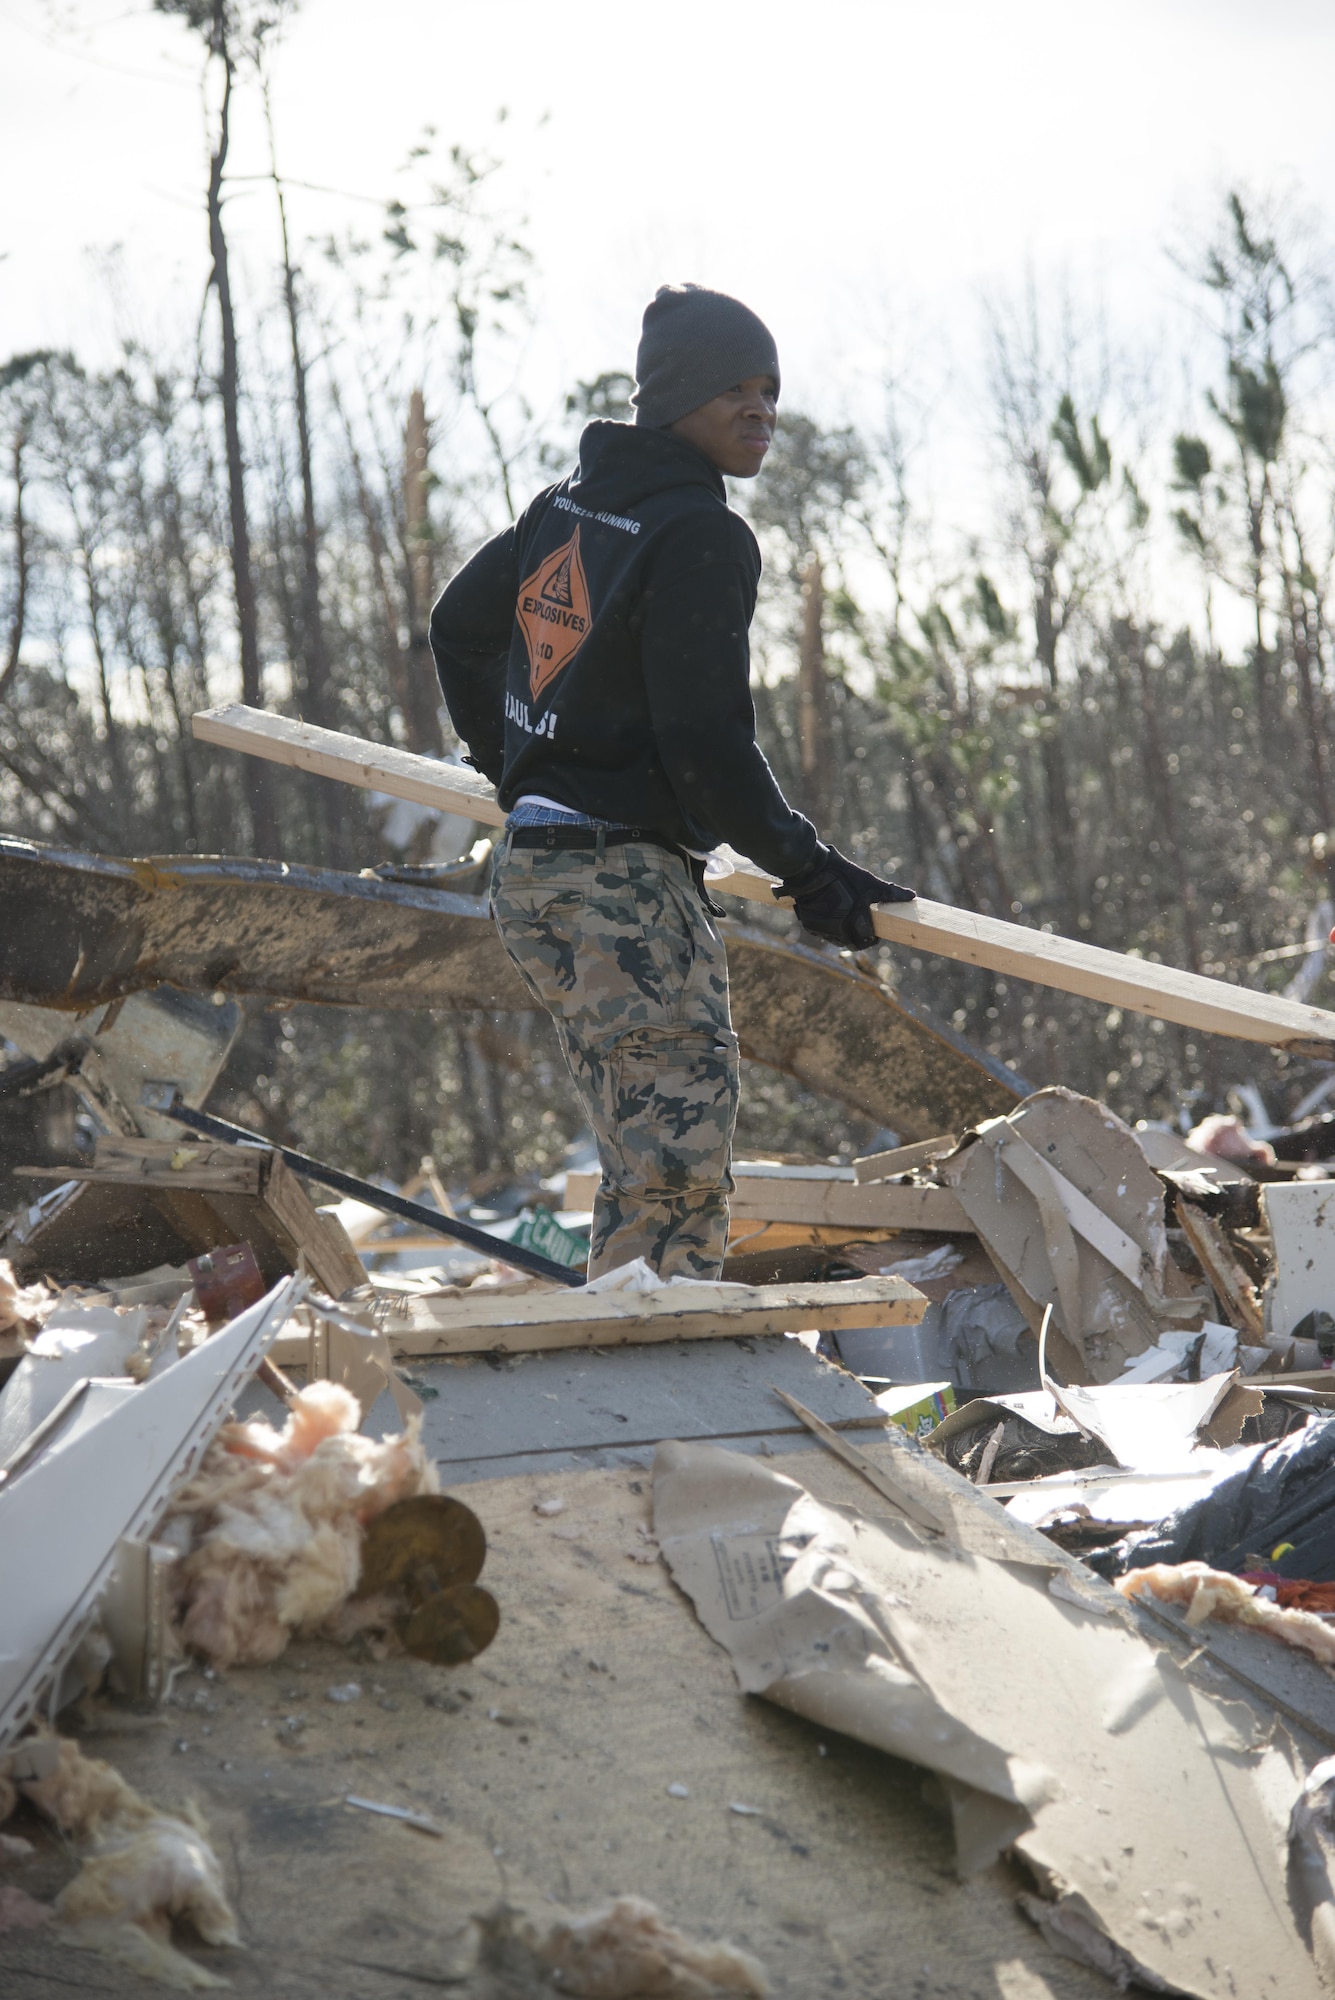 A Moody Air Force Base Airman salvages wood from piles of debris, Jan. 28, 2017, in Adel, Ga. The tornado killed 15 people and was later deemed an EF3, the strongest tornado to touch down in the county’s history. (U.S. Air Force photo by 2d Lt. Kaitlin Toner)